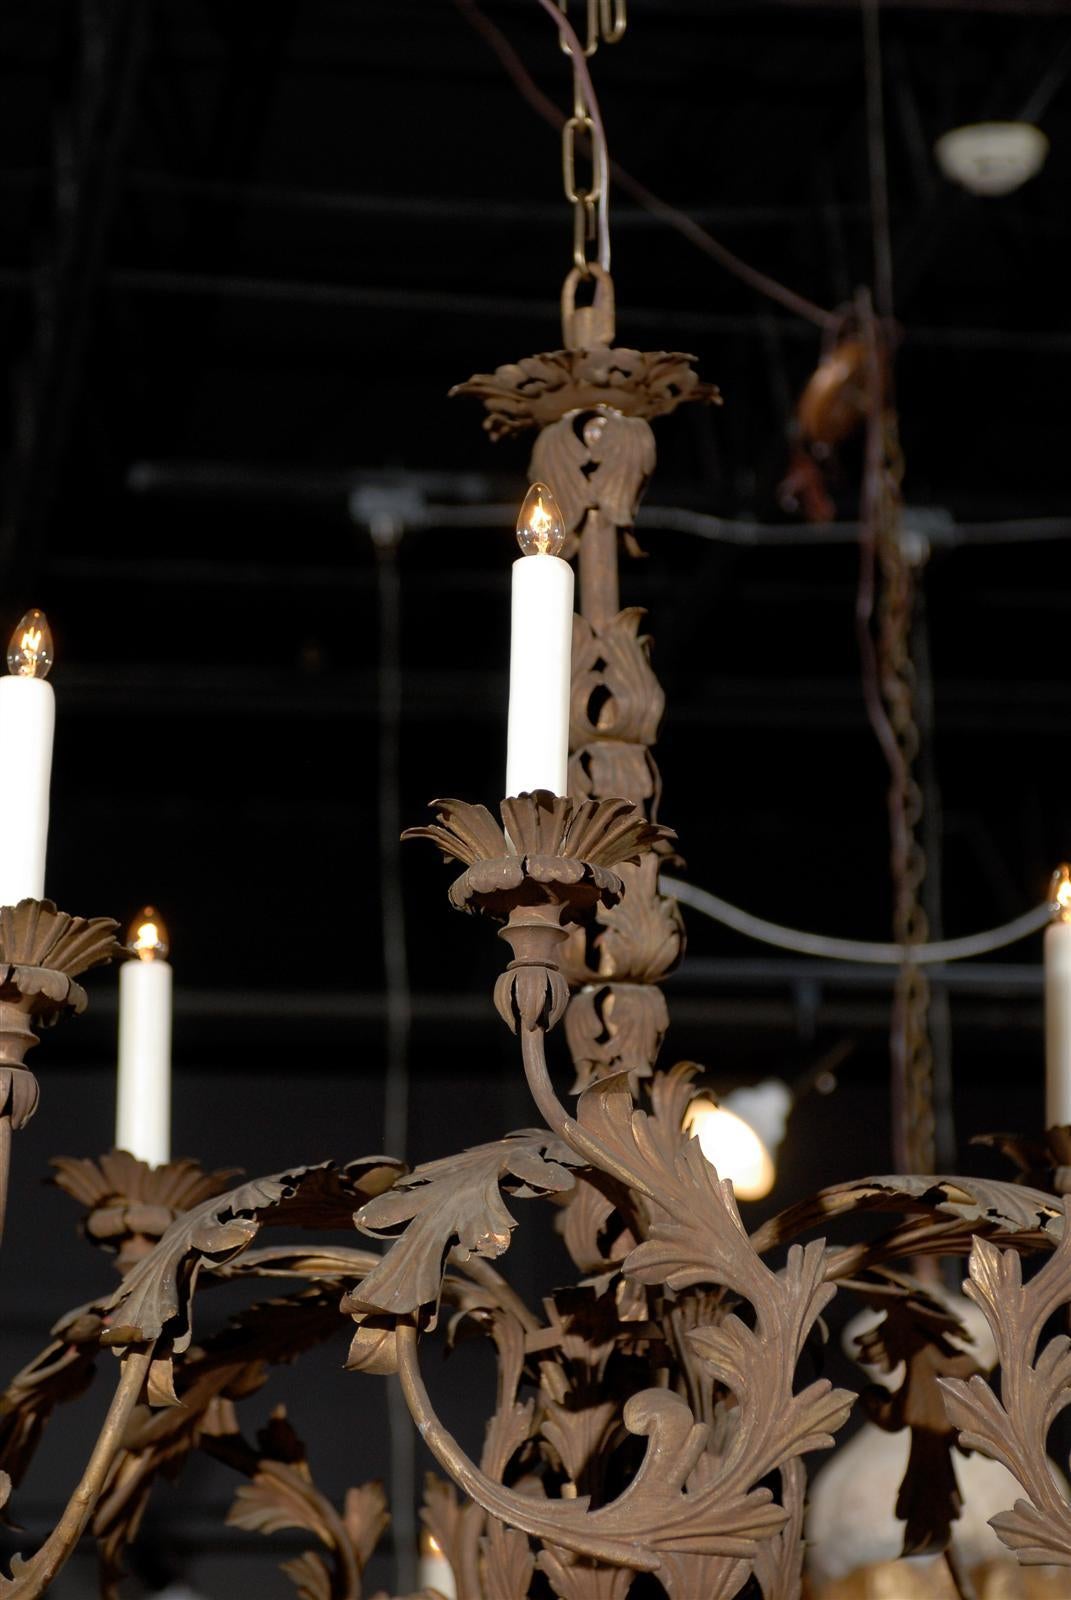 Italian 1890s Wrought Iron Eight-Light Chandelier with Scrolling Acanthus Leaves (Schmiedeeisen) im Angebot